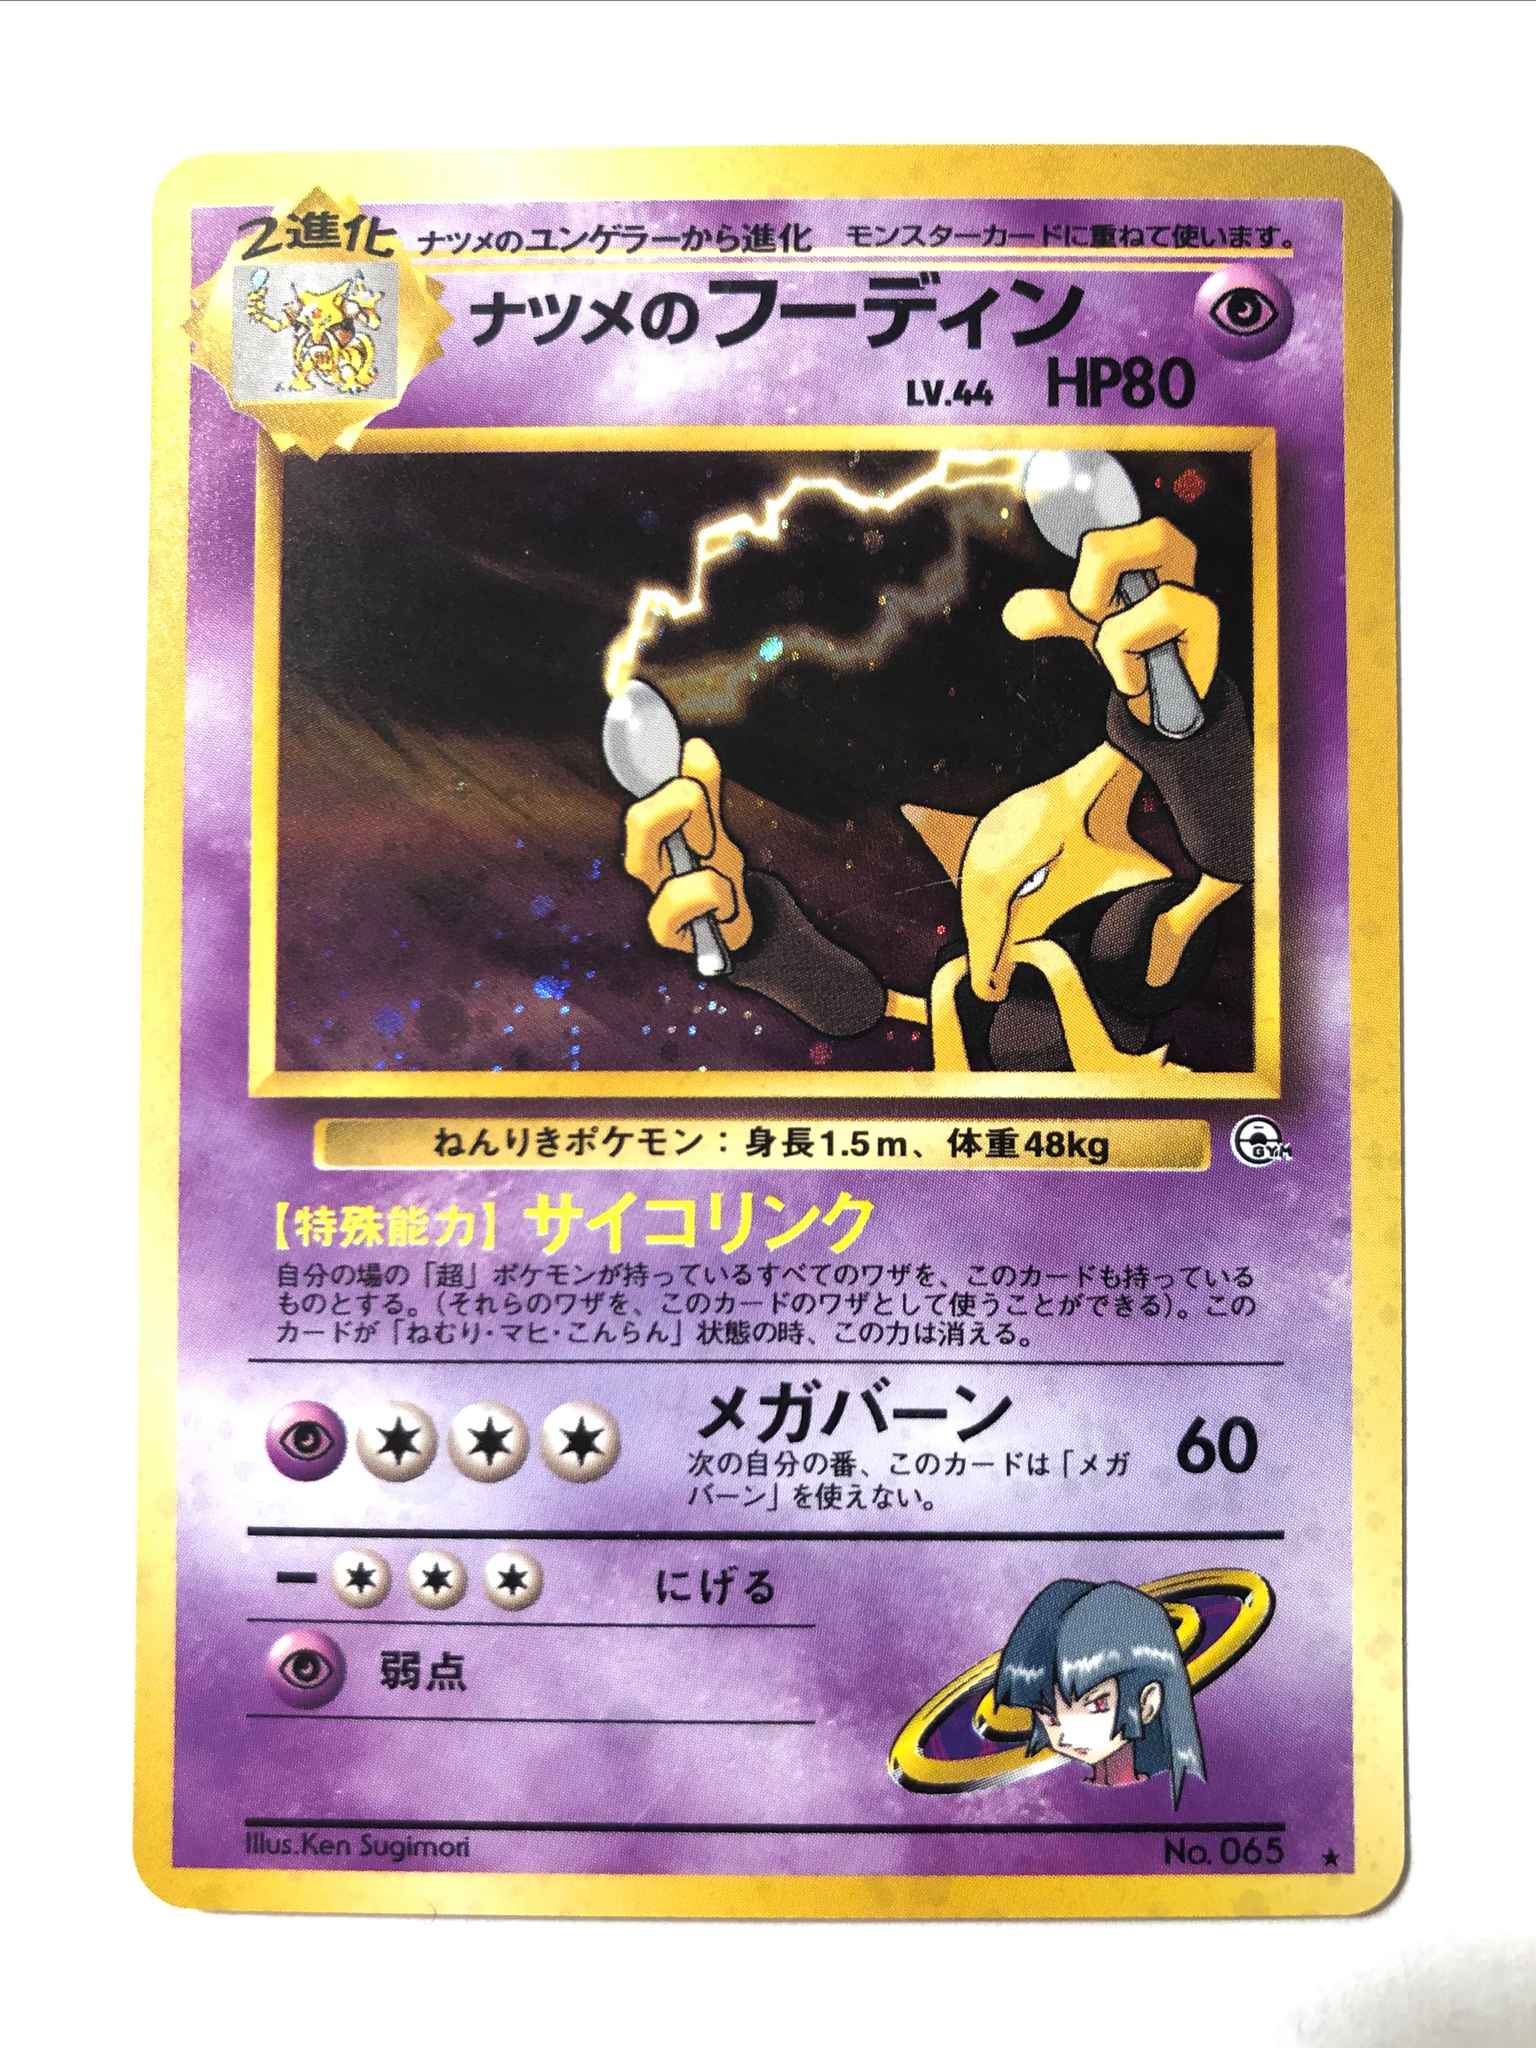 Sabrina S Alakazam Japanese Holo Rare Gym Challenge Set Sabrina S Alakazam Gym Challenge Pokemon Online Gaming Store For Cards Miniatures Singles Packs Booster Boxes